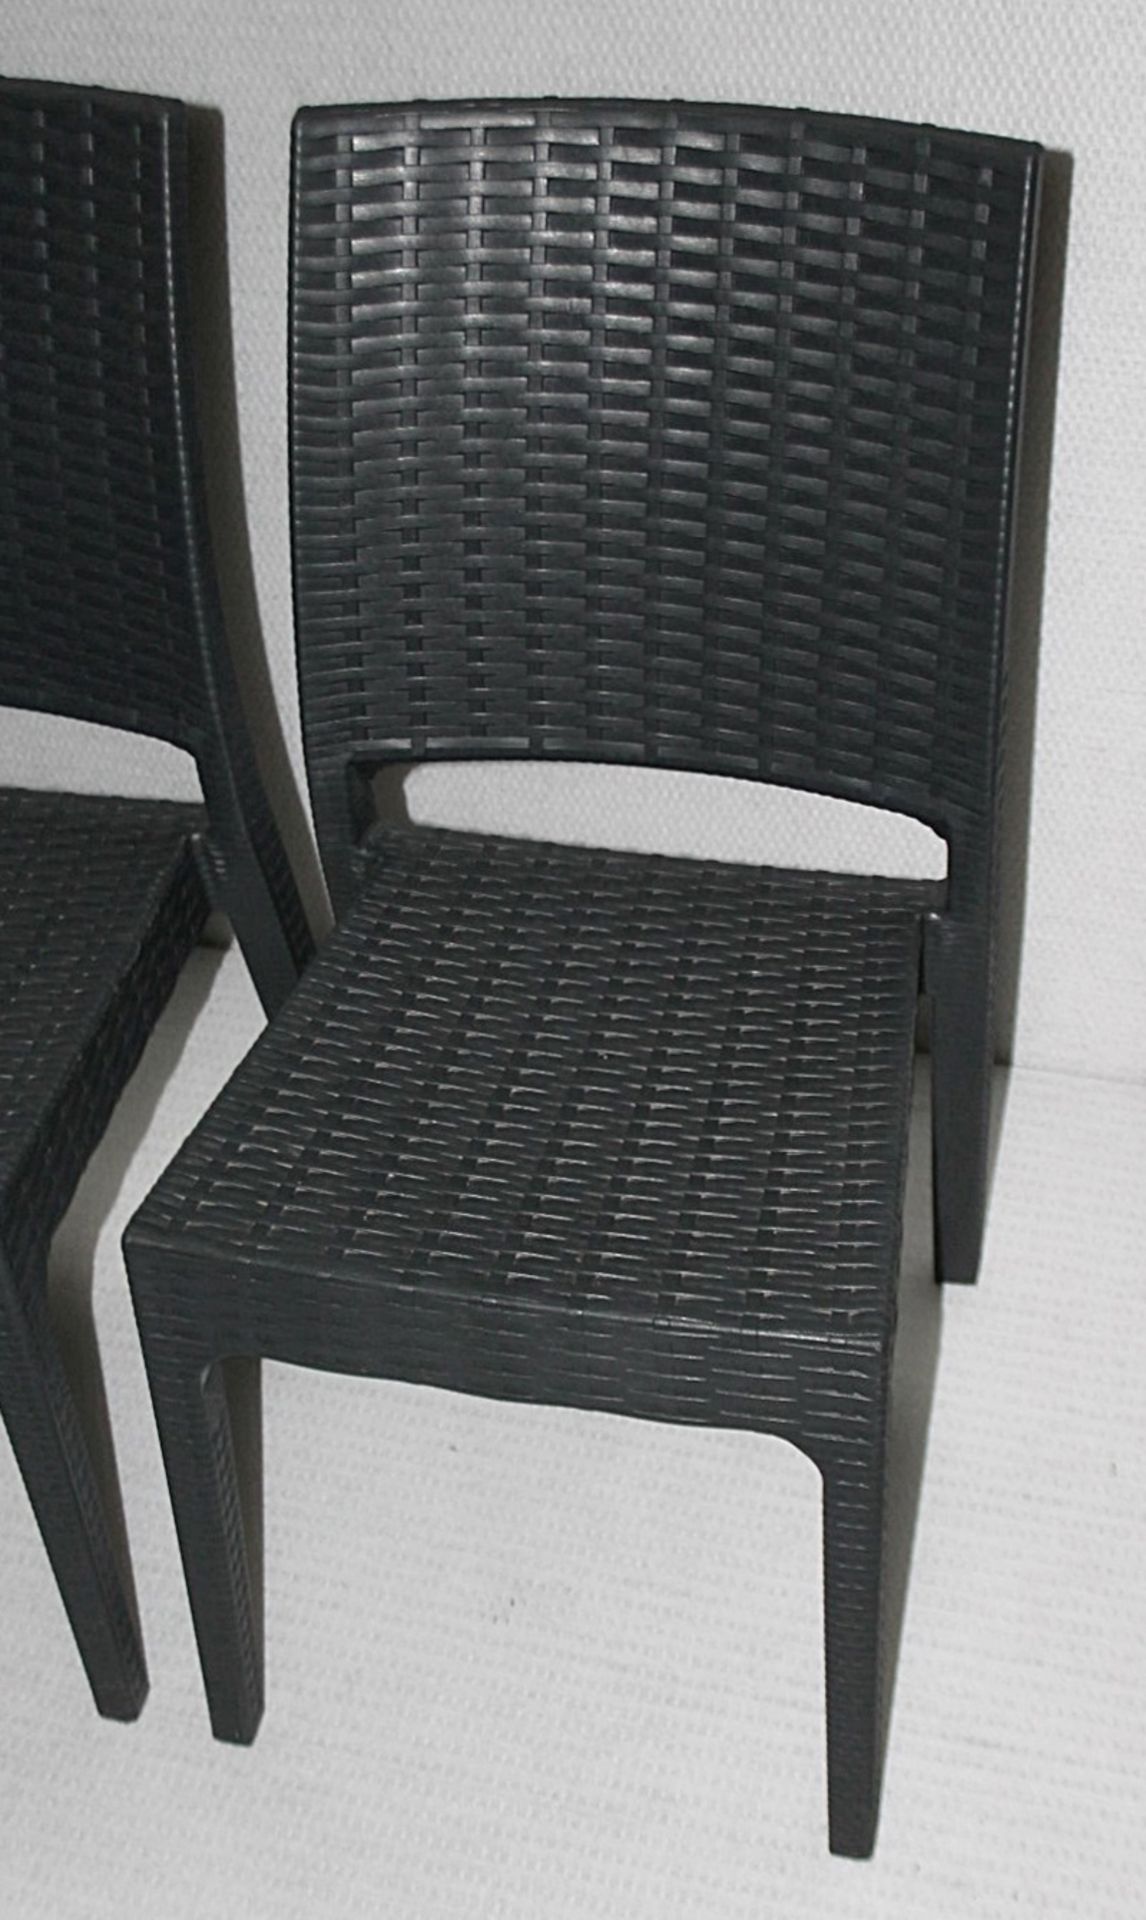 8 x Siesta 'Florida' Rattan Style Garden Chairs In Dark Grey - Suitable For Commercial or Home Use - - Image 14 of 14